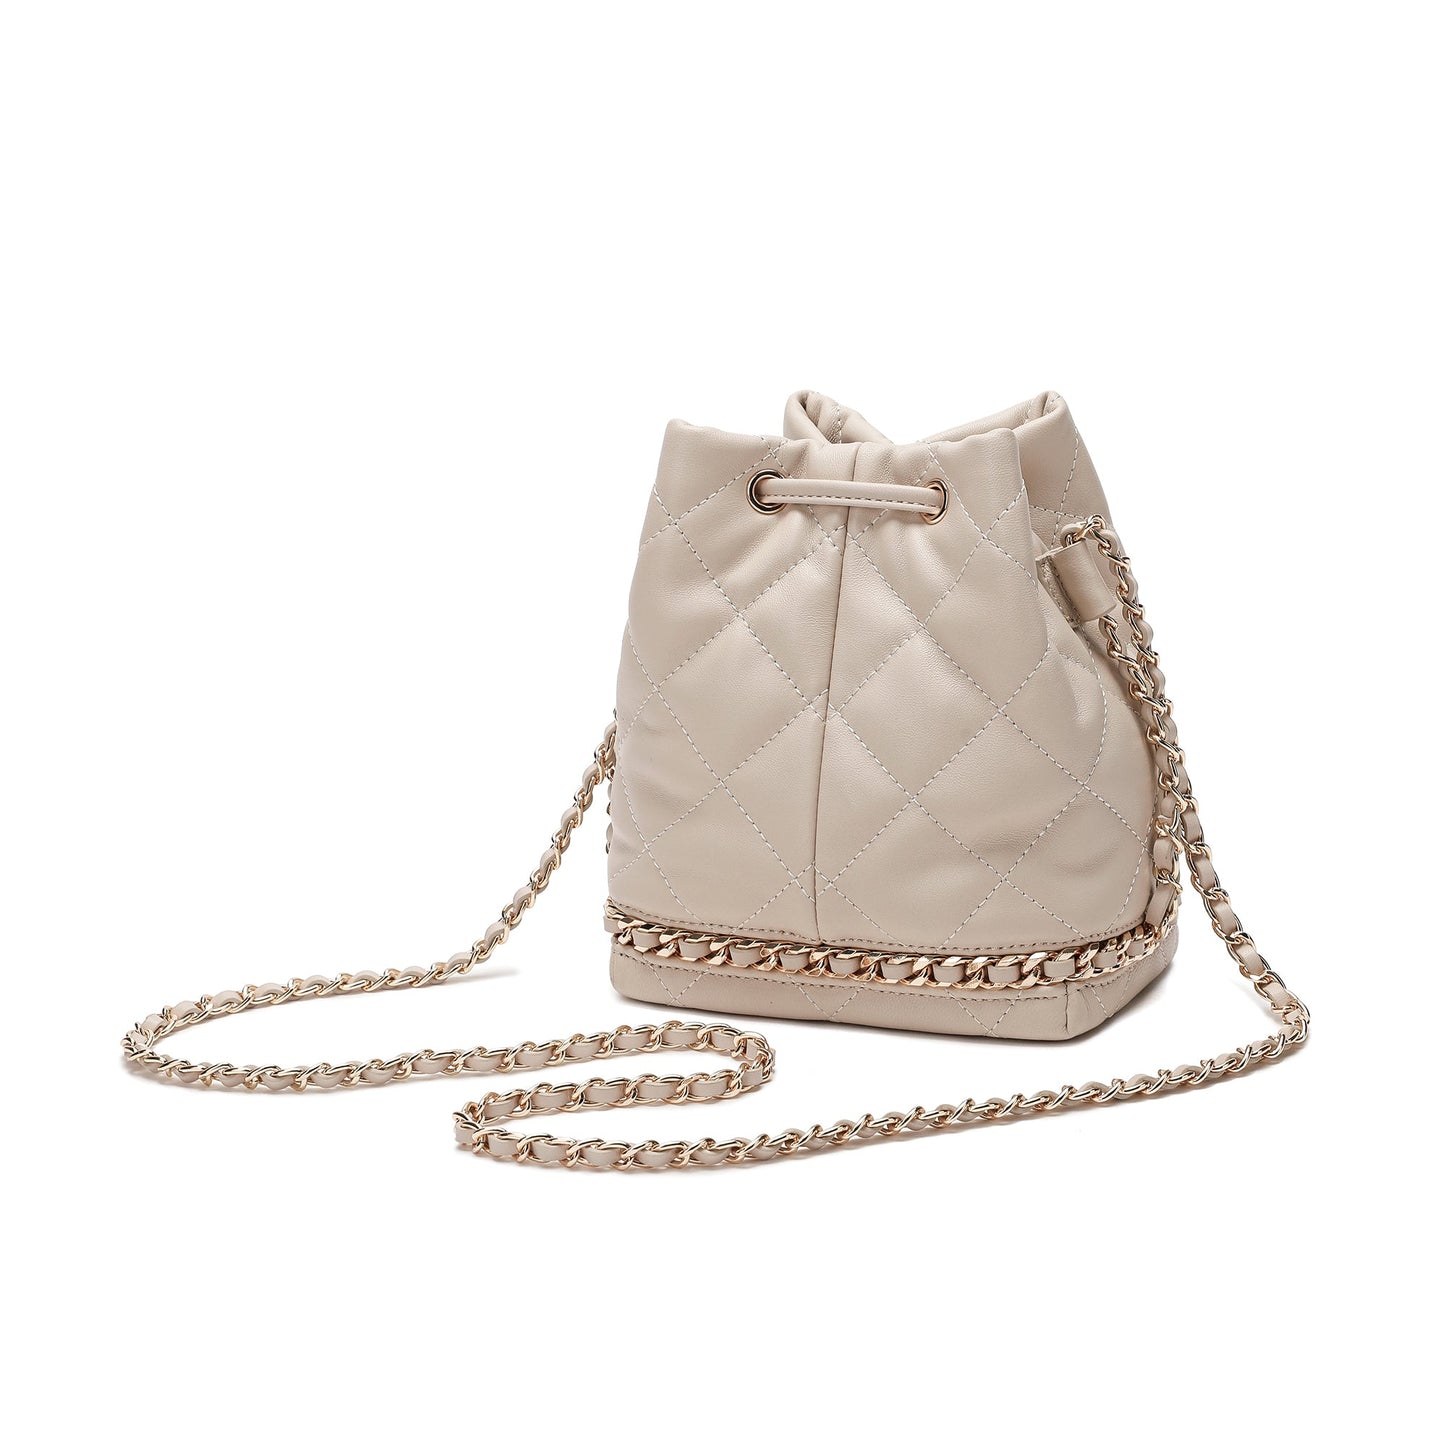 Full-Grain Quilted Lambskin Leather Drawstring Bag